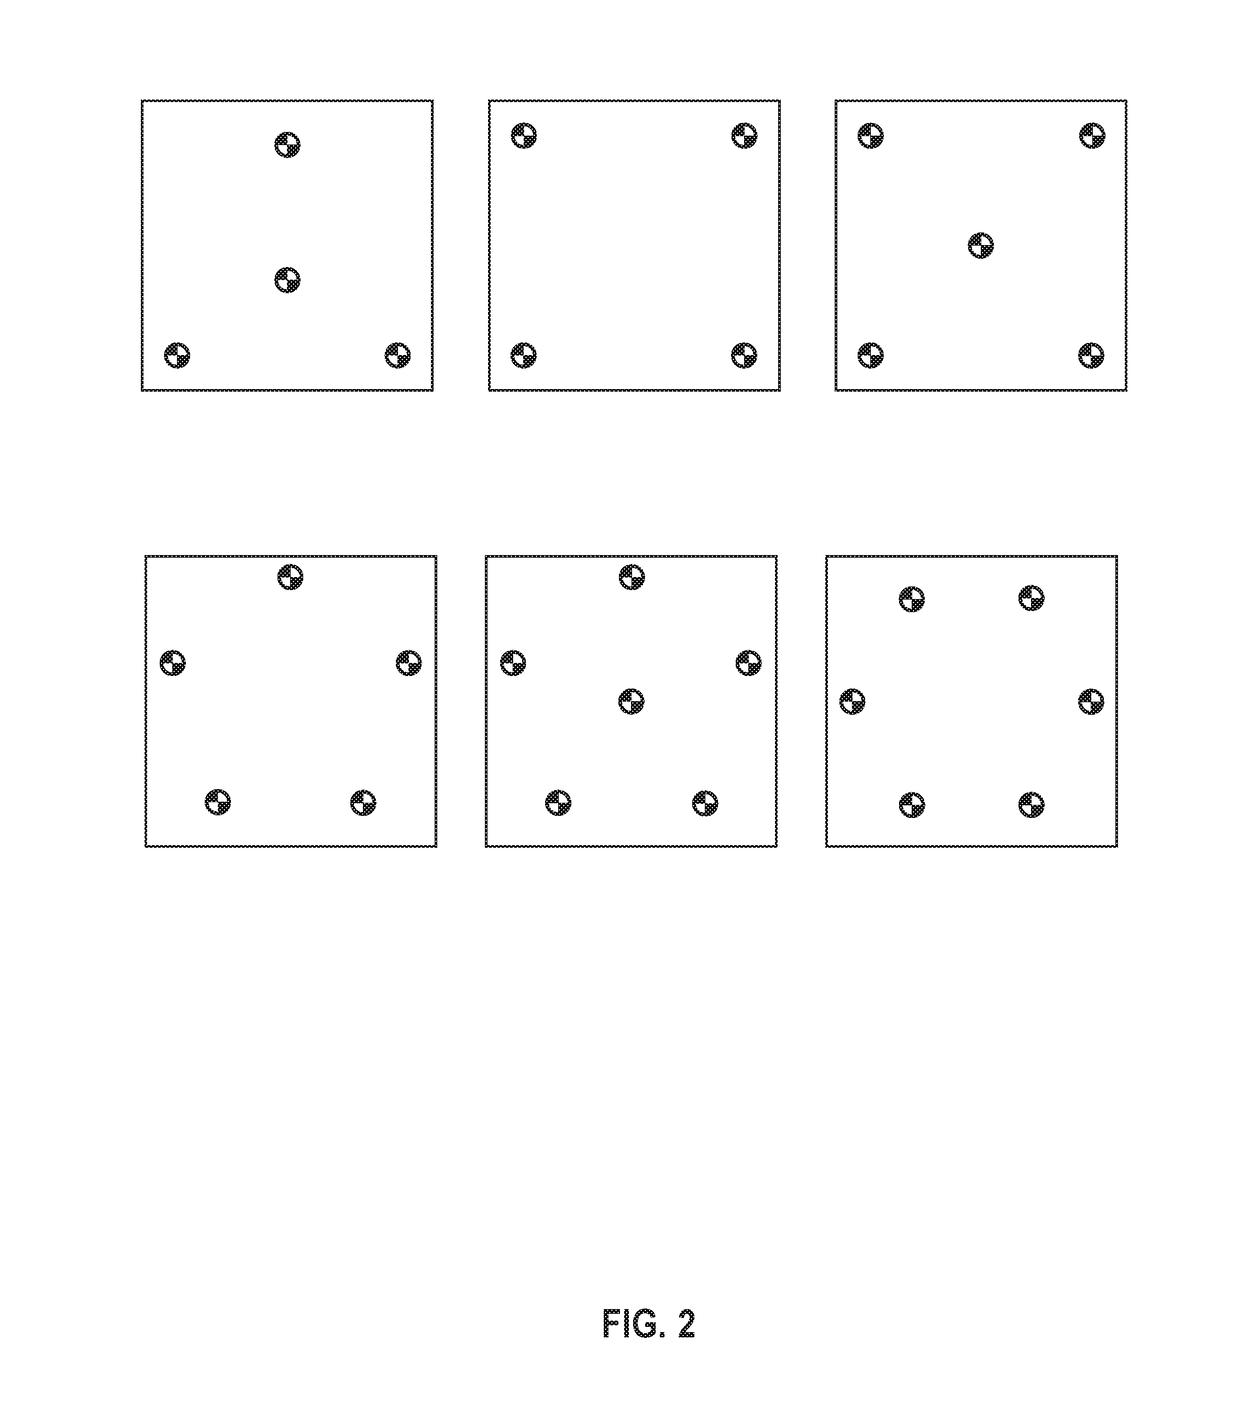 Method and system for 3D capture based on structure from motion with simplified pose detection